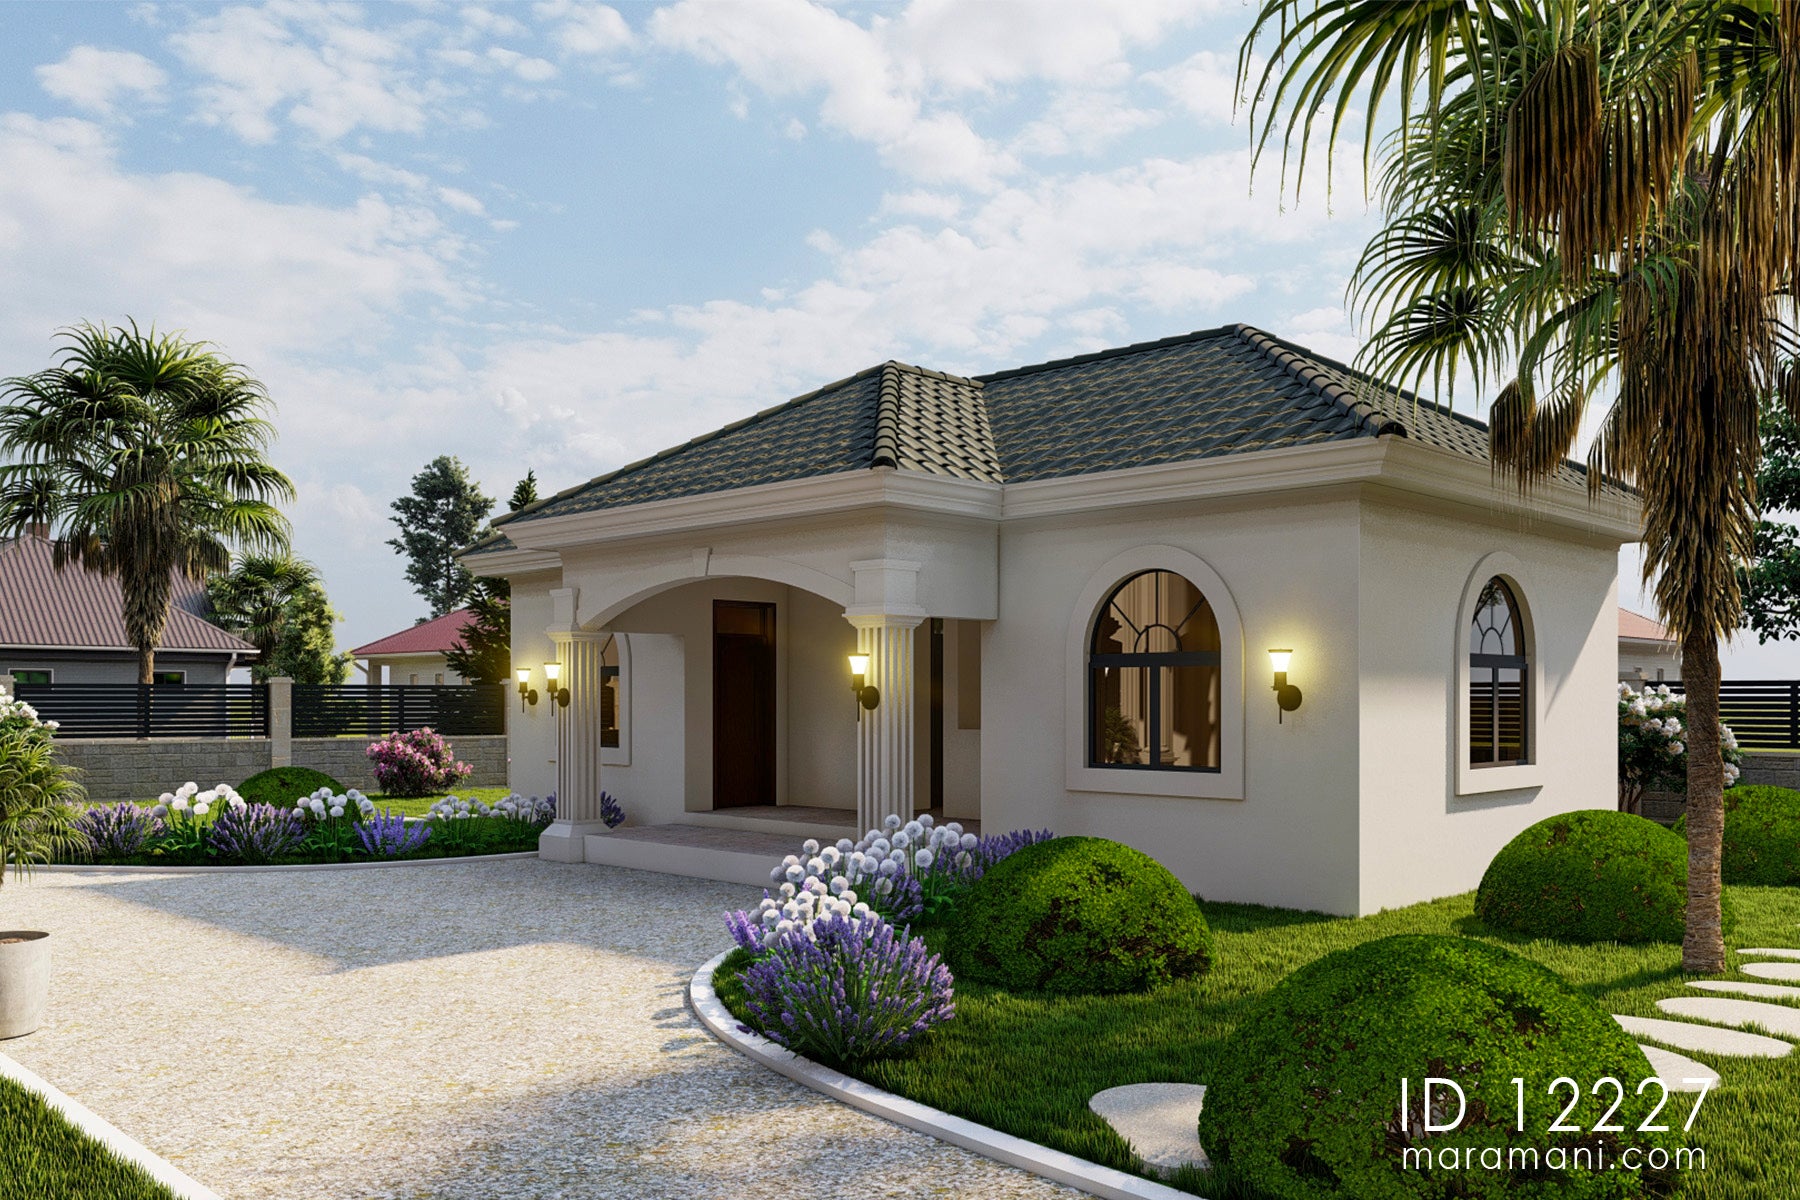 Two Bedroom House Plan - ID 12227